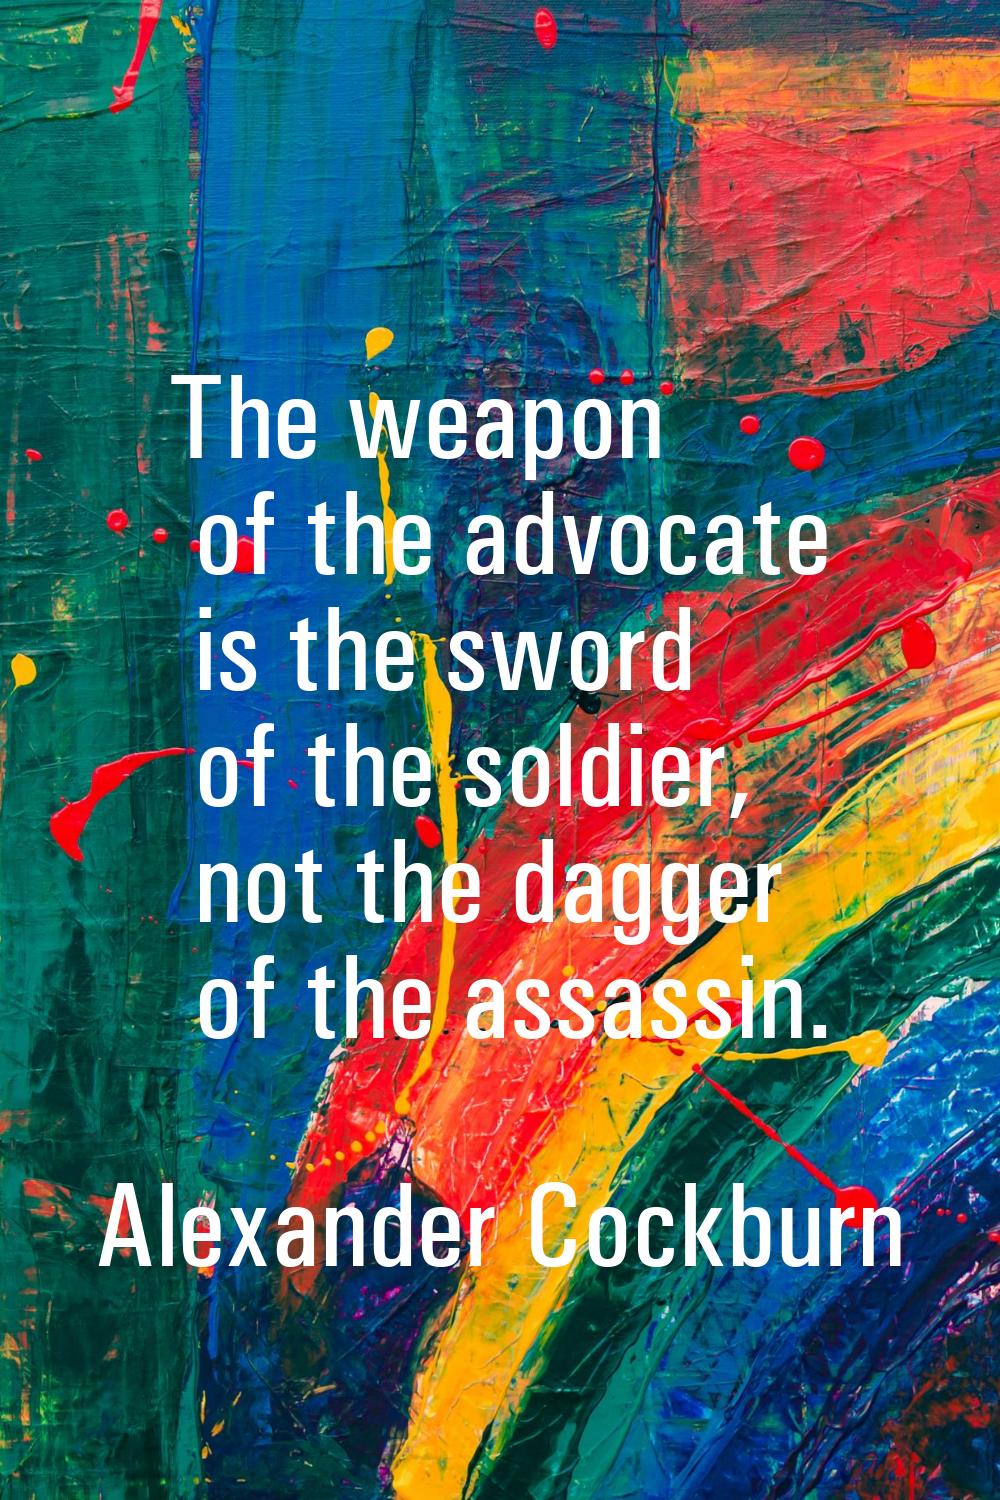 The weapon of the advocate is the sword of the soldier, not the dagger of the assassin.